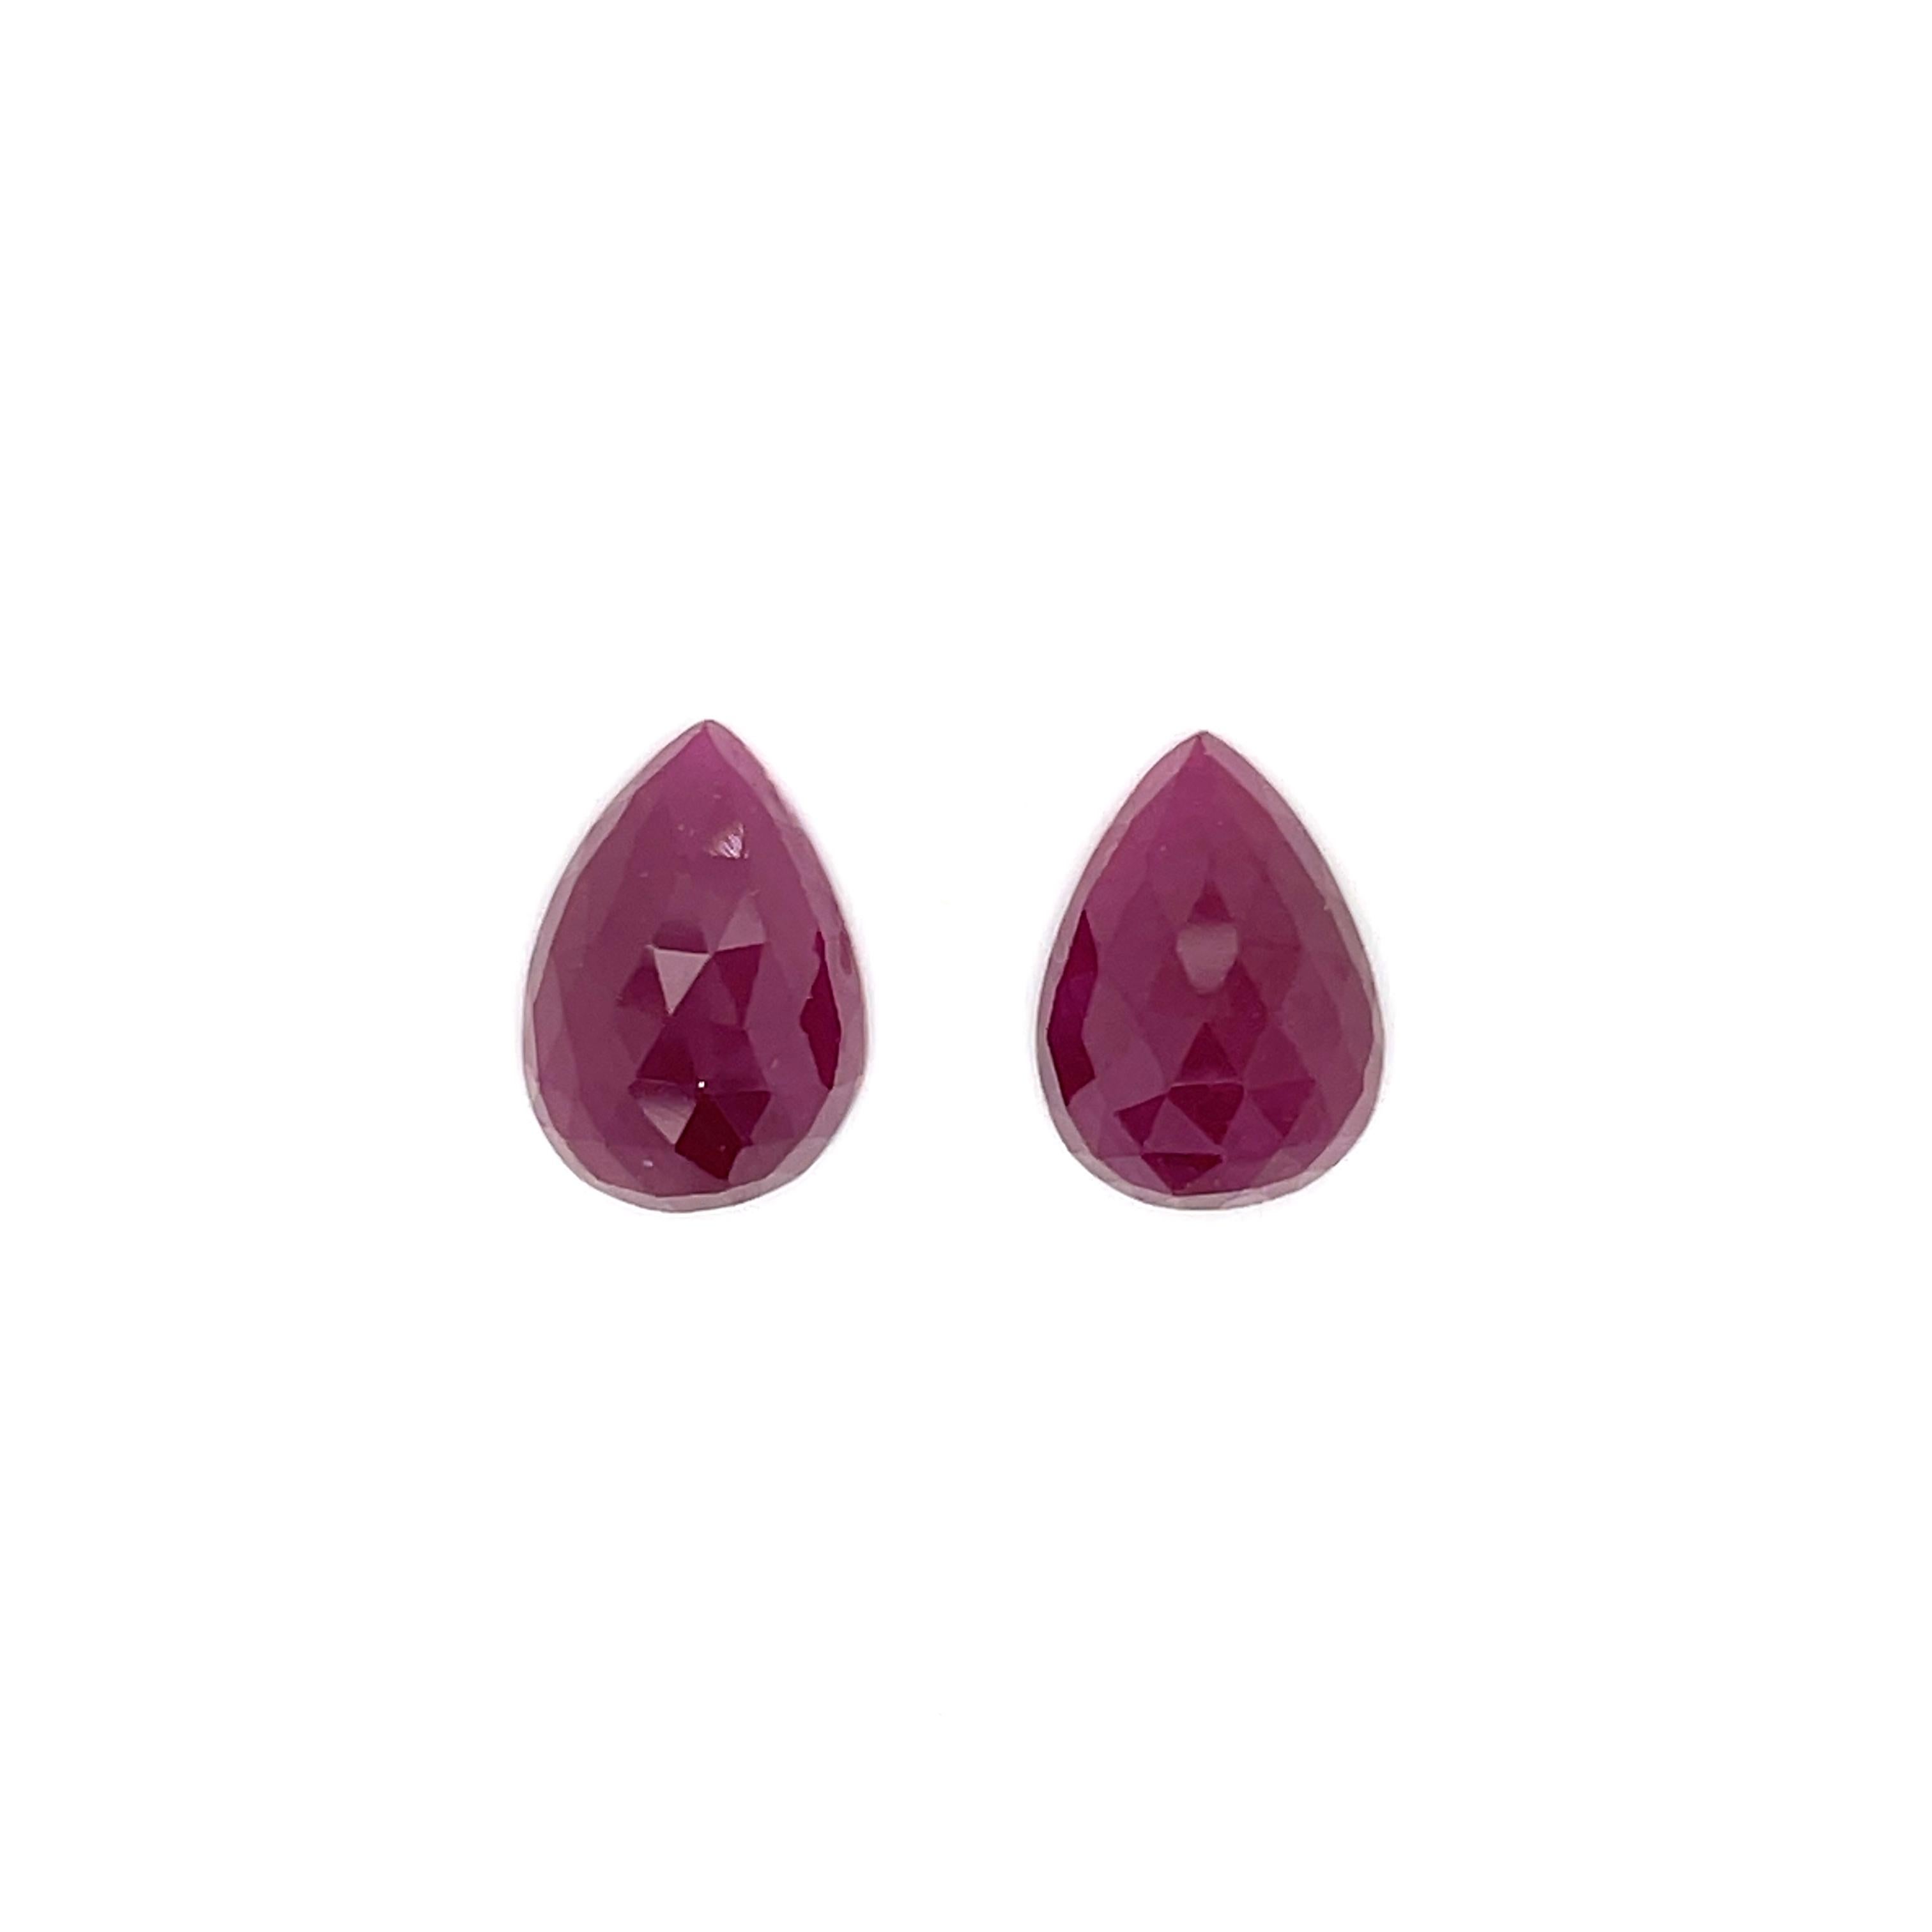 No Heat 2 Indian Pear-Shaped Buff Rubies Cts 20.22 For Sale 1